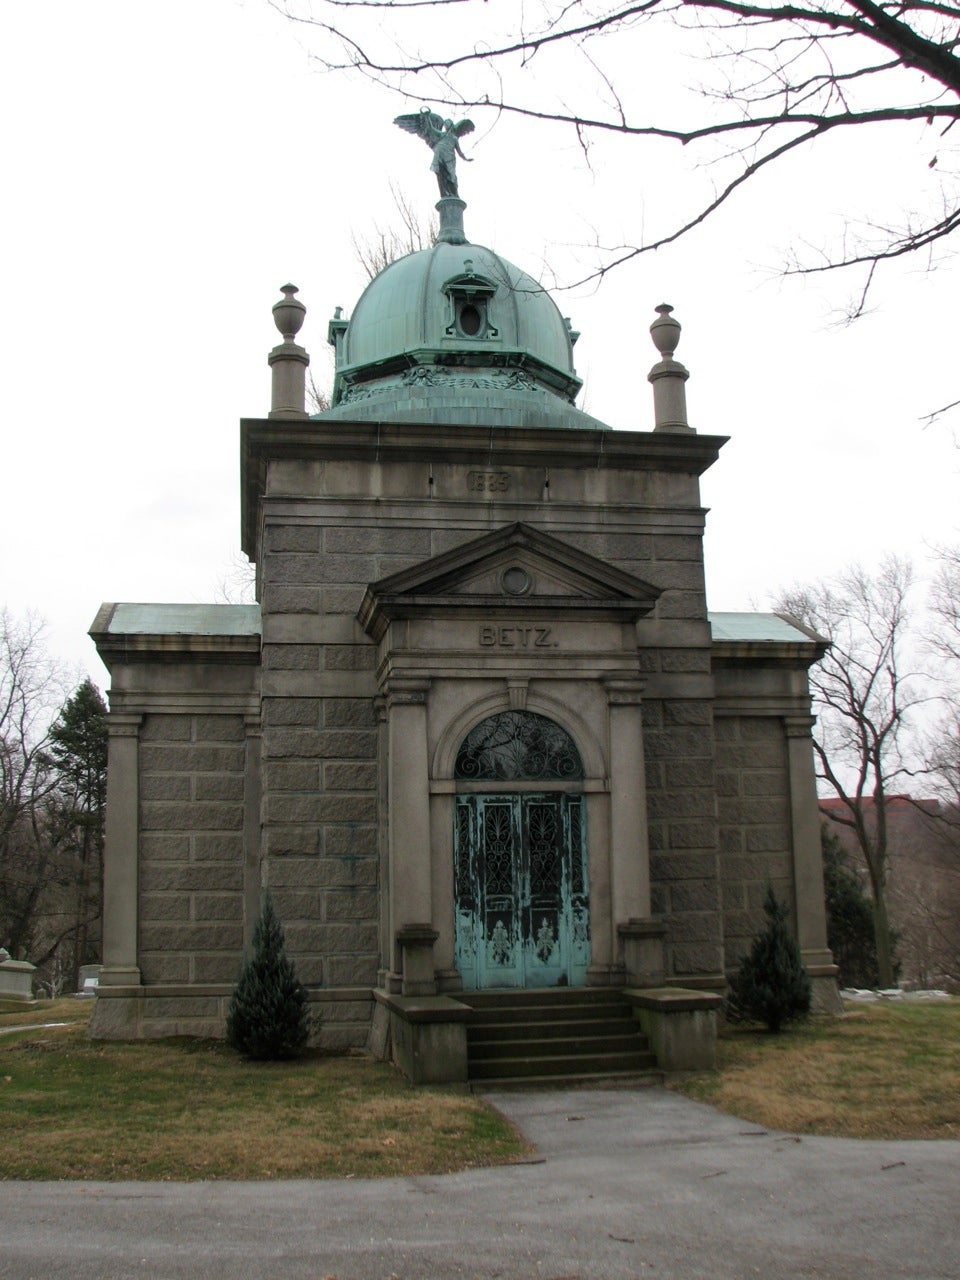 Brewer John Betz built this Classical mausoleum in the late 1800s in his own lifetime.